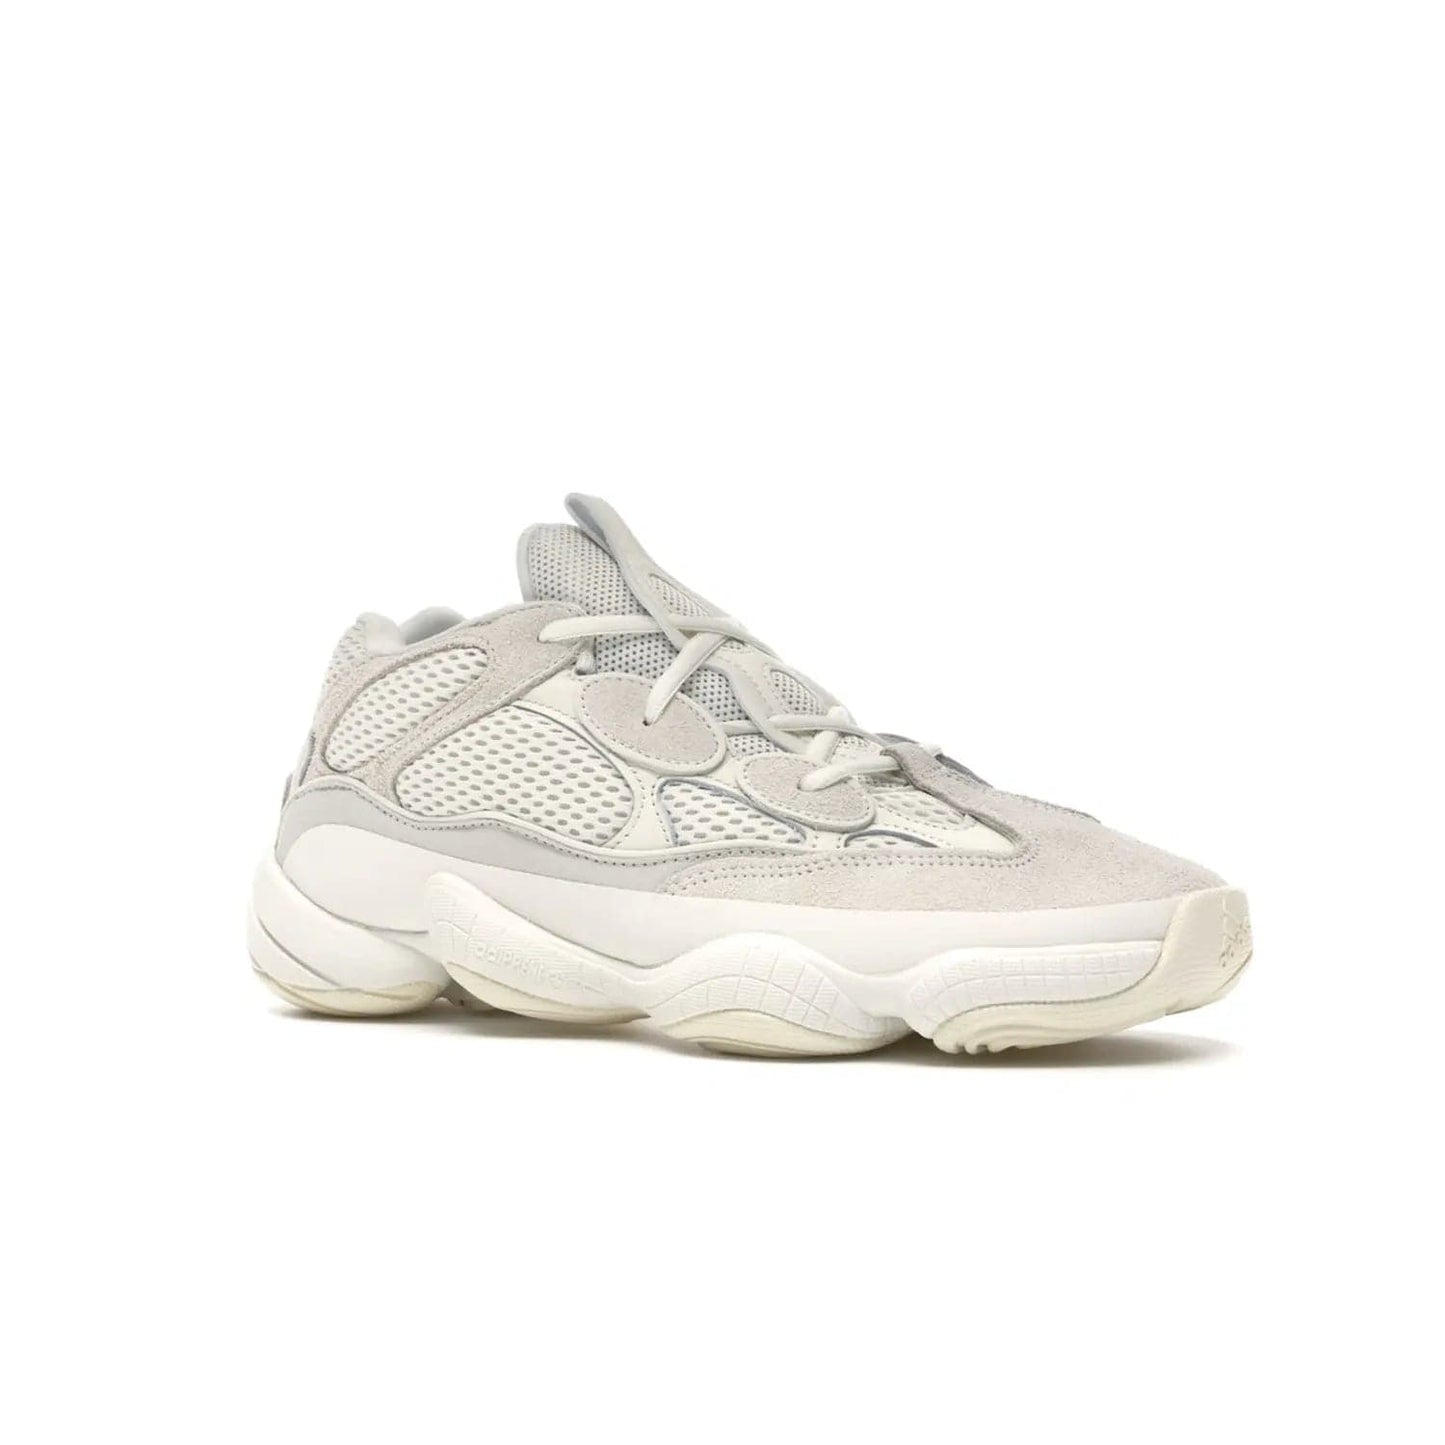 adidas Yeezy 500 Bone White - Image 4 - Only at www.BallersClubKickz.com - Classic look perfect for any sneaker collection. The adidas Yeezy 500 "Bone White" blends a white mesh upper with suede overlays & a chunky midsole inspired by the Adidas KB3. Complimented by a tonal-cream outsole, this timeless style is a must-have.